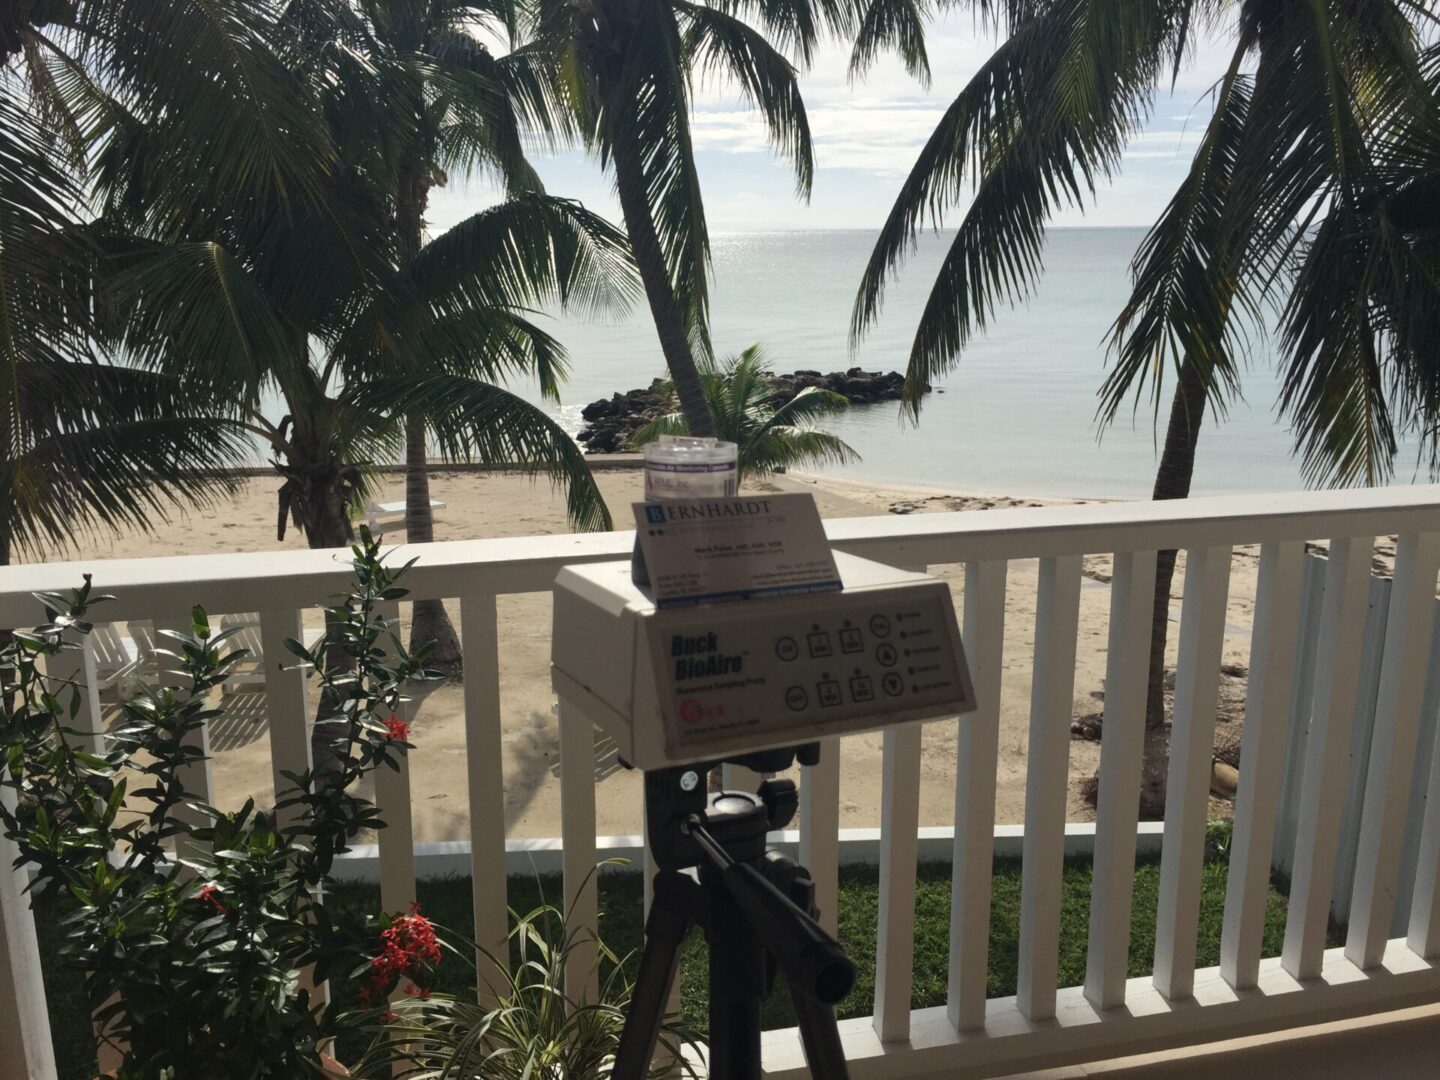 A camera on top of a tripod in front of the ocean.